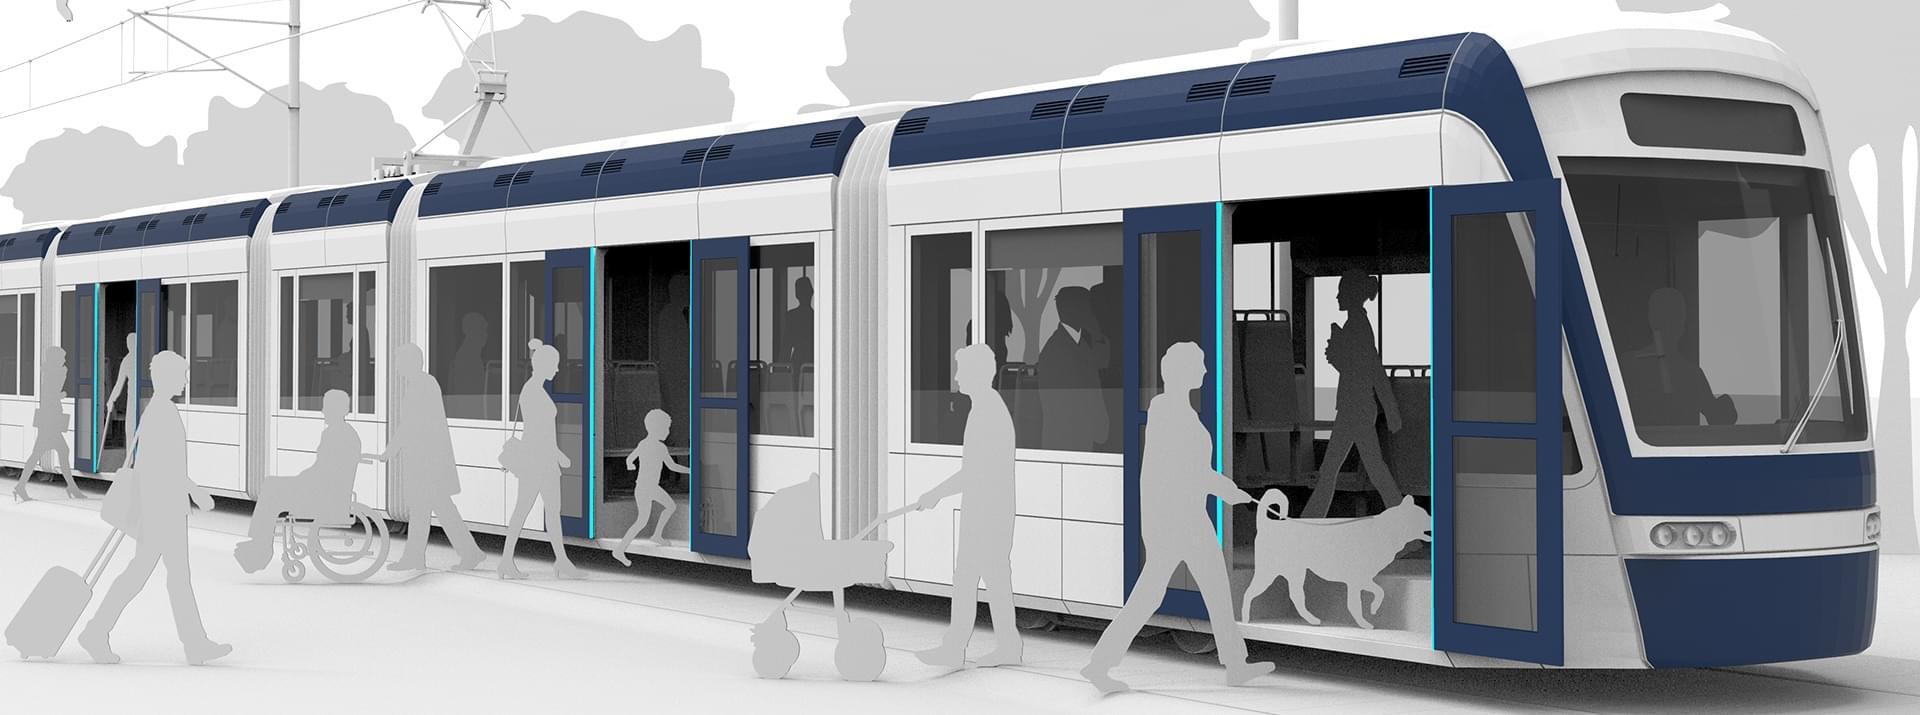 Illustrated tram with people